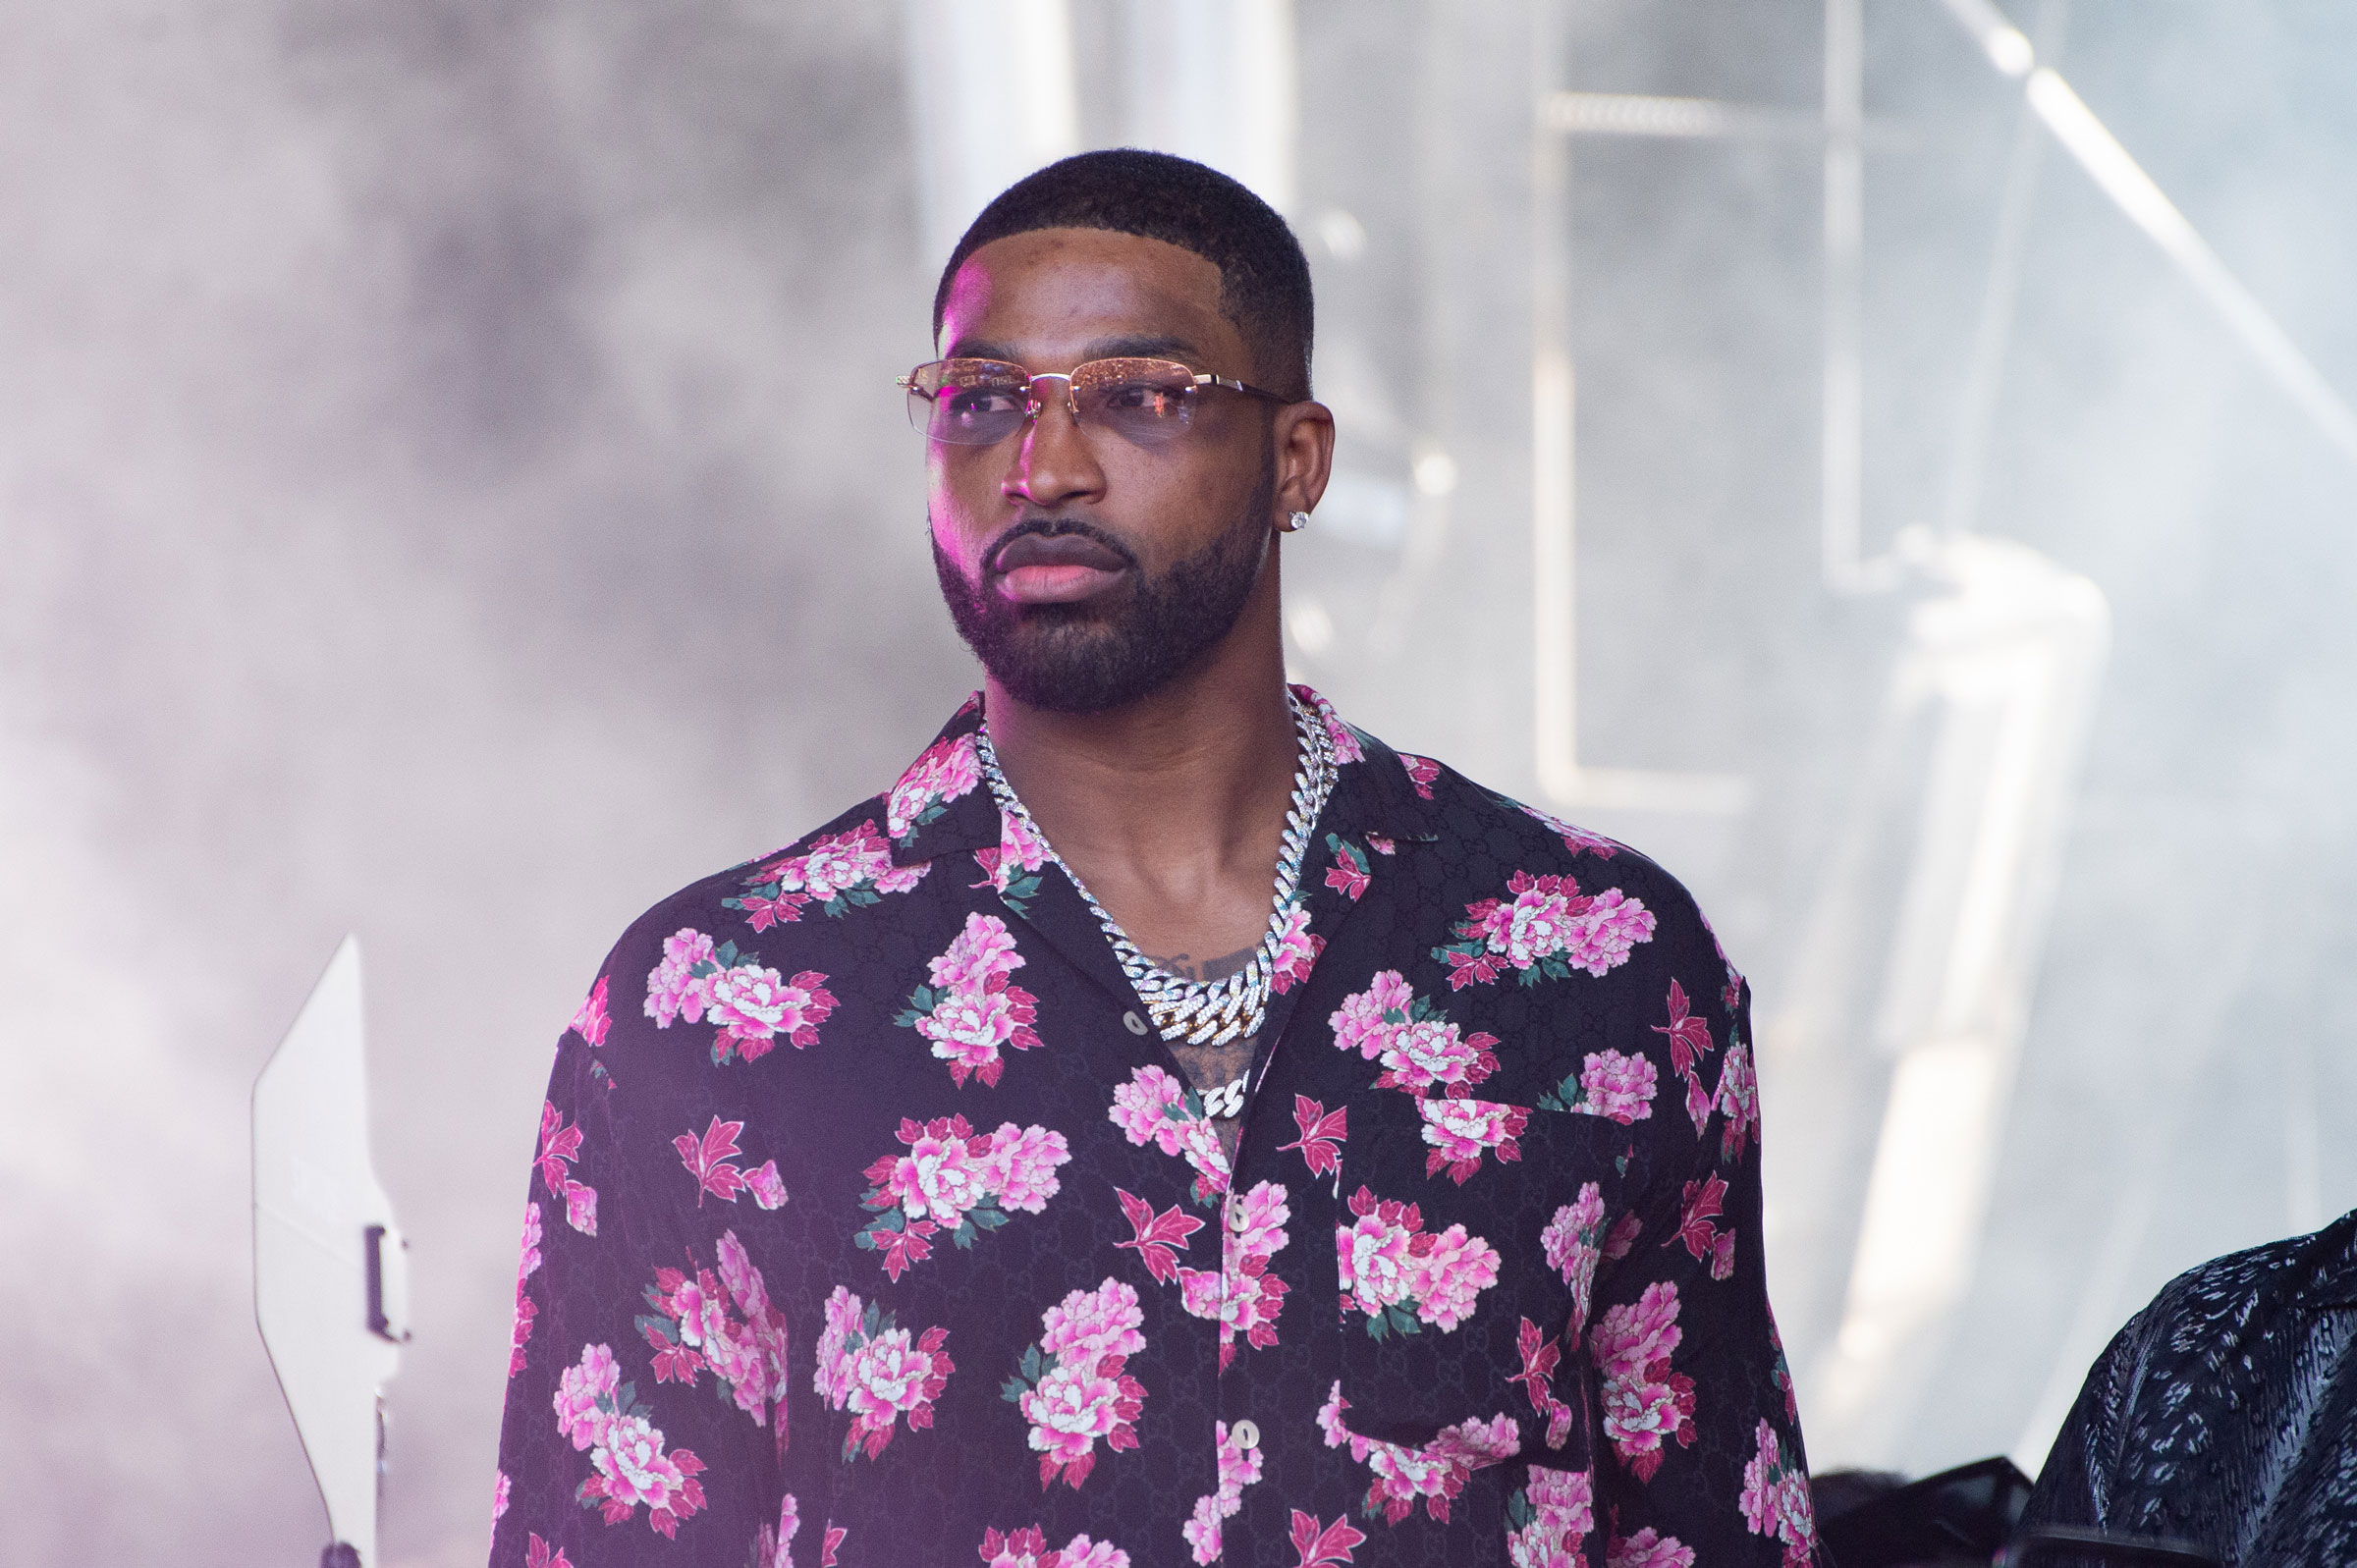 Tristan Thompson watches the Giveon concert from the side of the main stage during Wireless Festival at Finsbury Park in London on July 08, 2022.